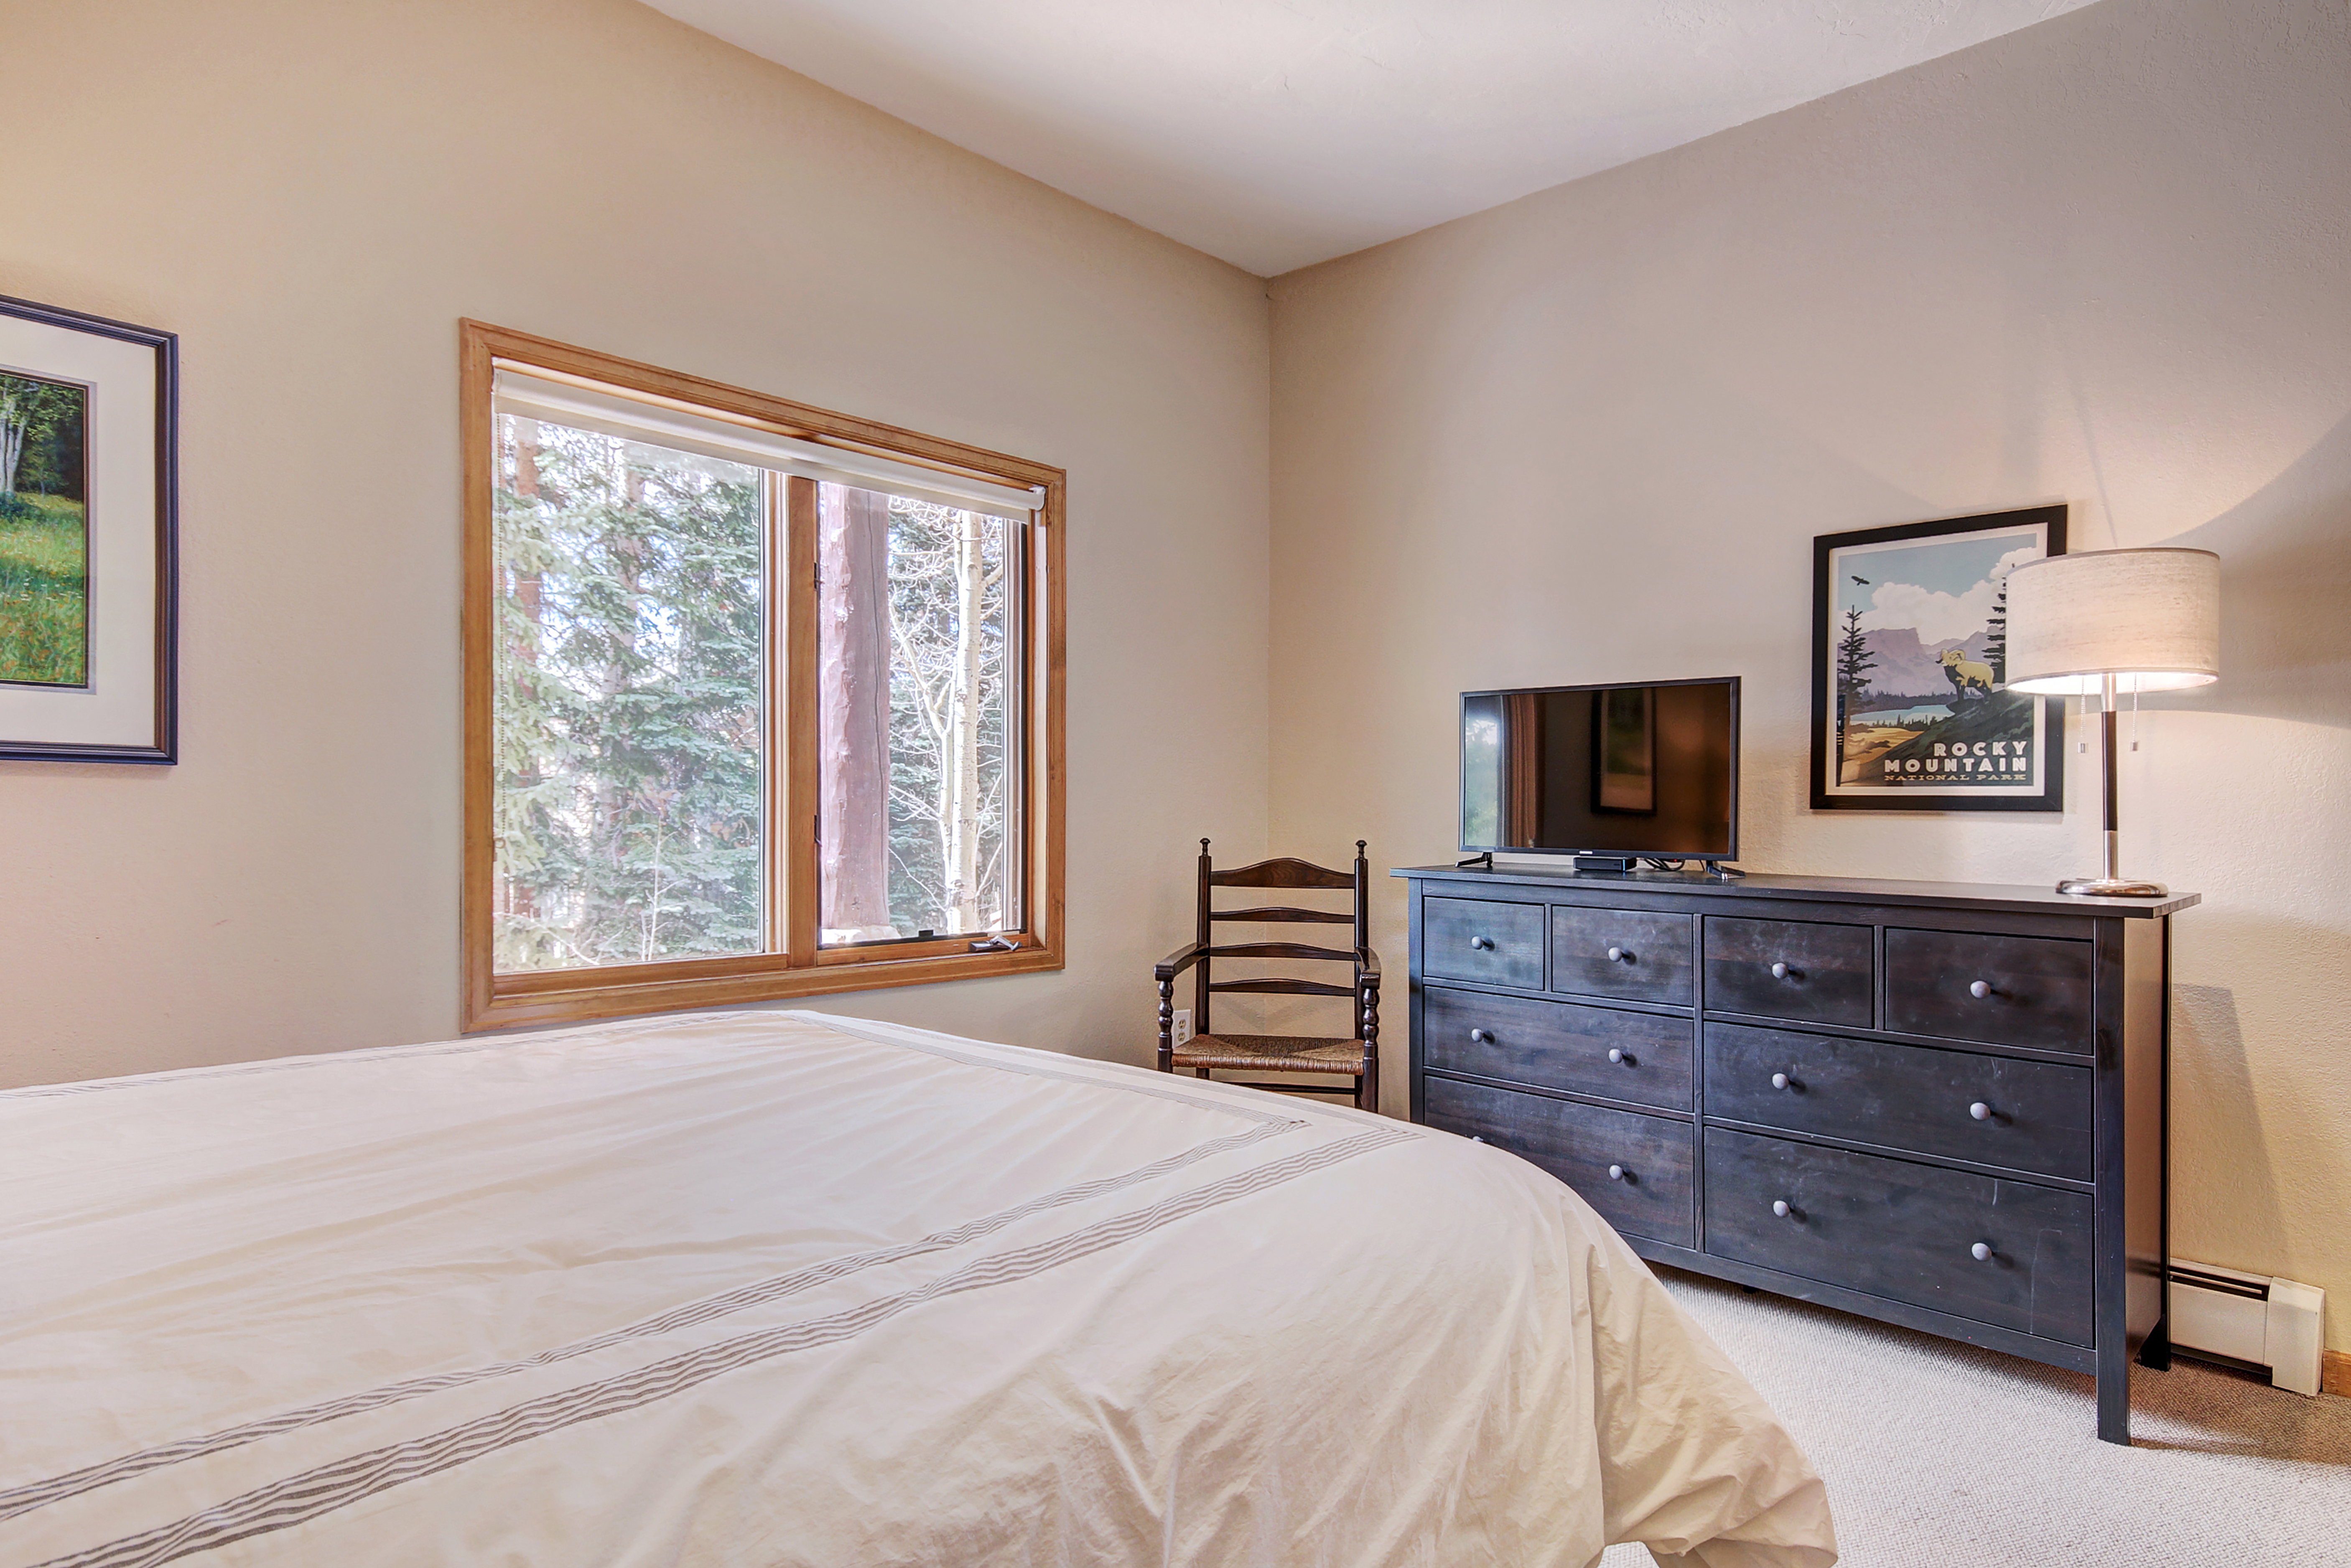 Additional view of lower level room with Queen-size bed, flat screen TV and shared bath - 10 Southface Breckenridge Vacation Rental